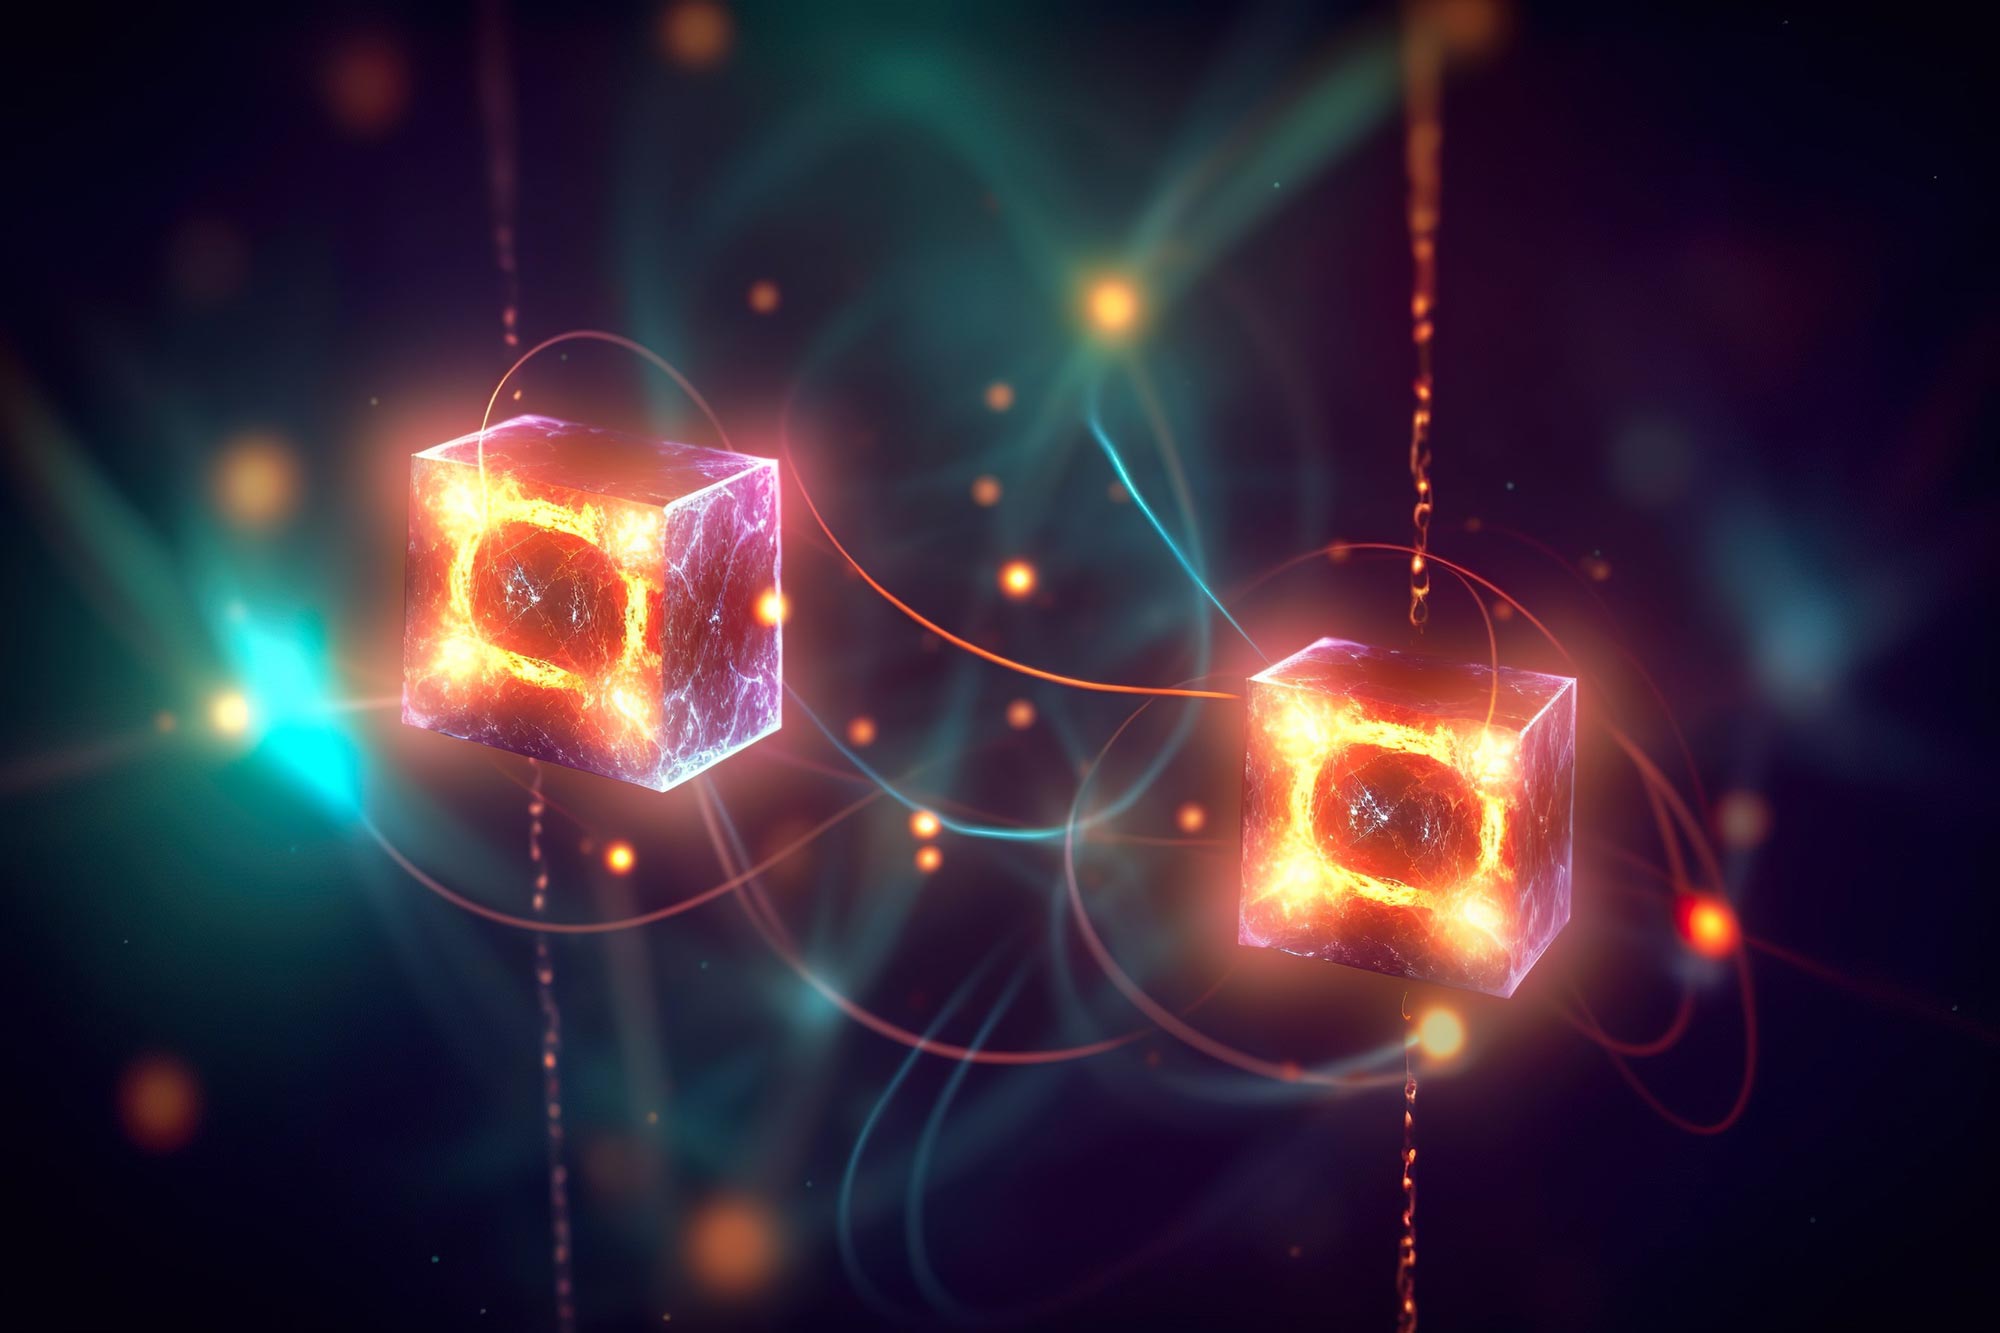 Physicists create new form of light, MIT News